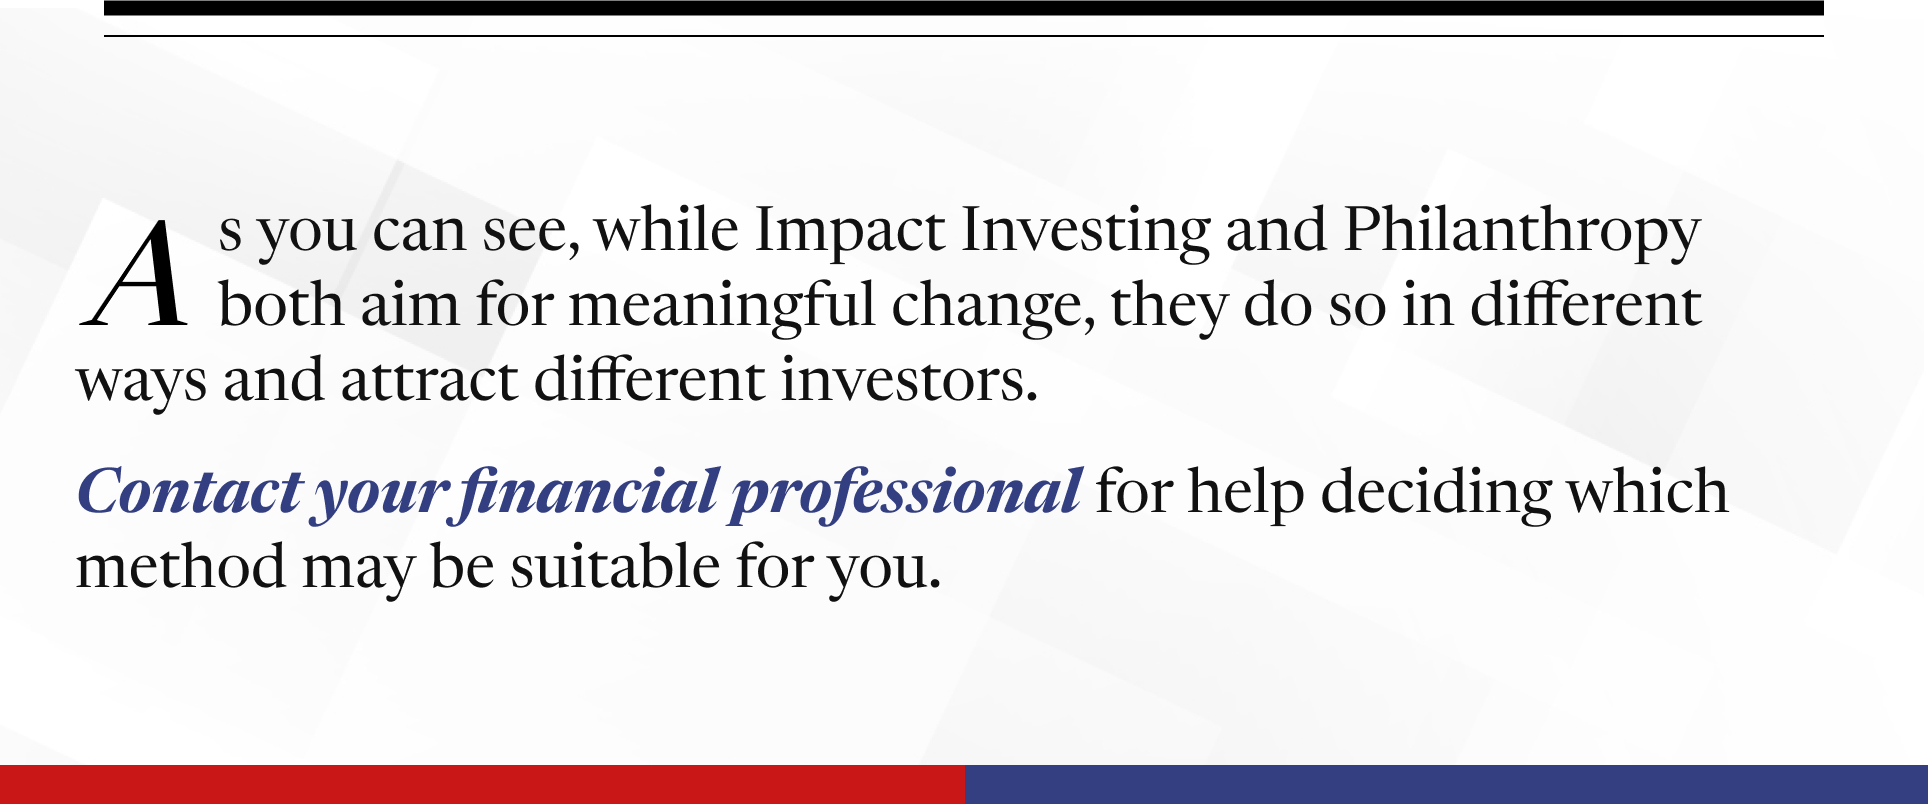 The piece ends with the following words between two horizontal bars: As you can see, while Impact Investing and Philanthropy aim for meaningful change, they do so in different ways and attract different investors. Contact your financial professional for help deciding which method may be suitable for you.